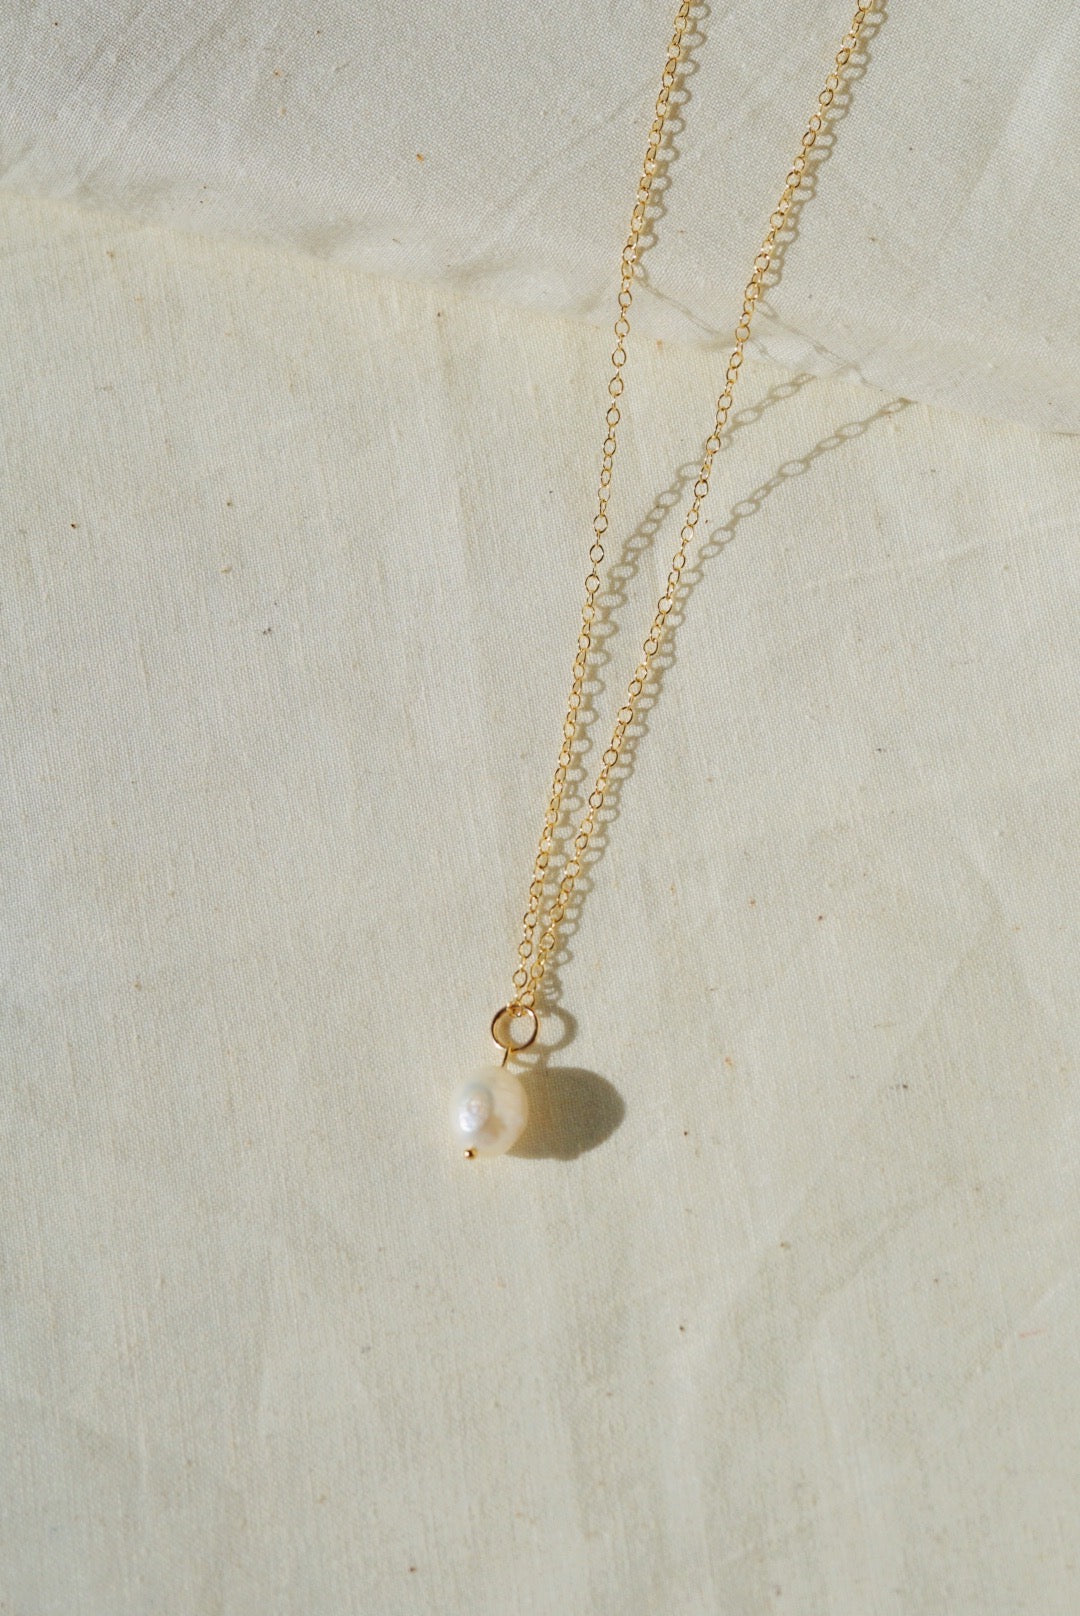 HARP Pearl Pendant Gold Filled Necklace White